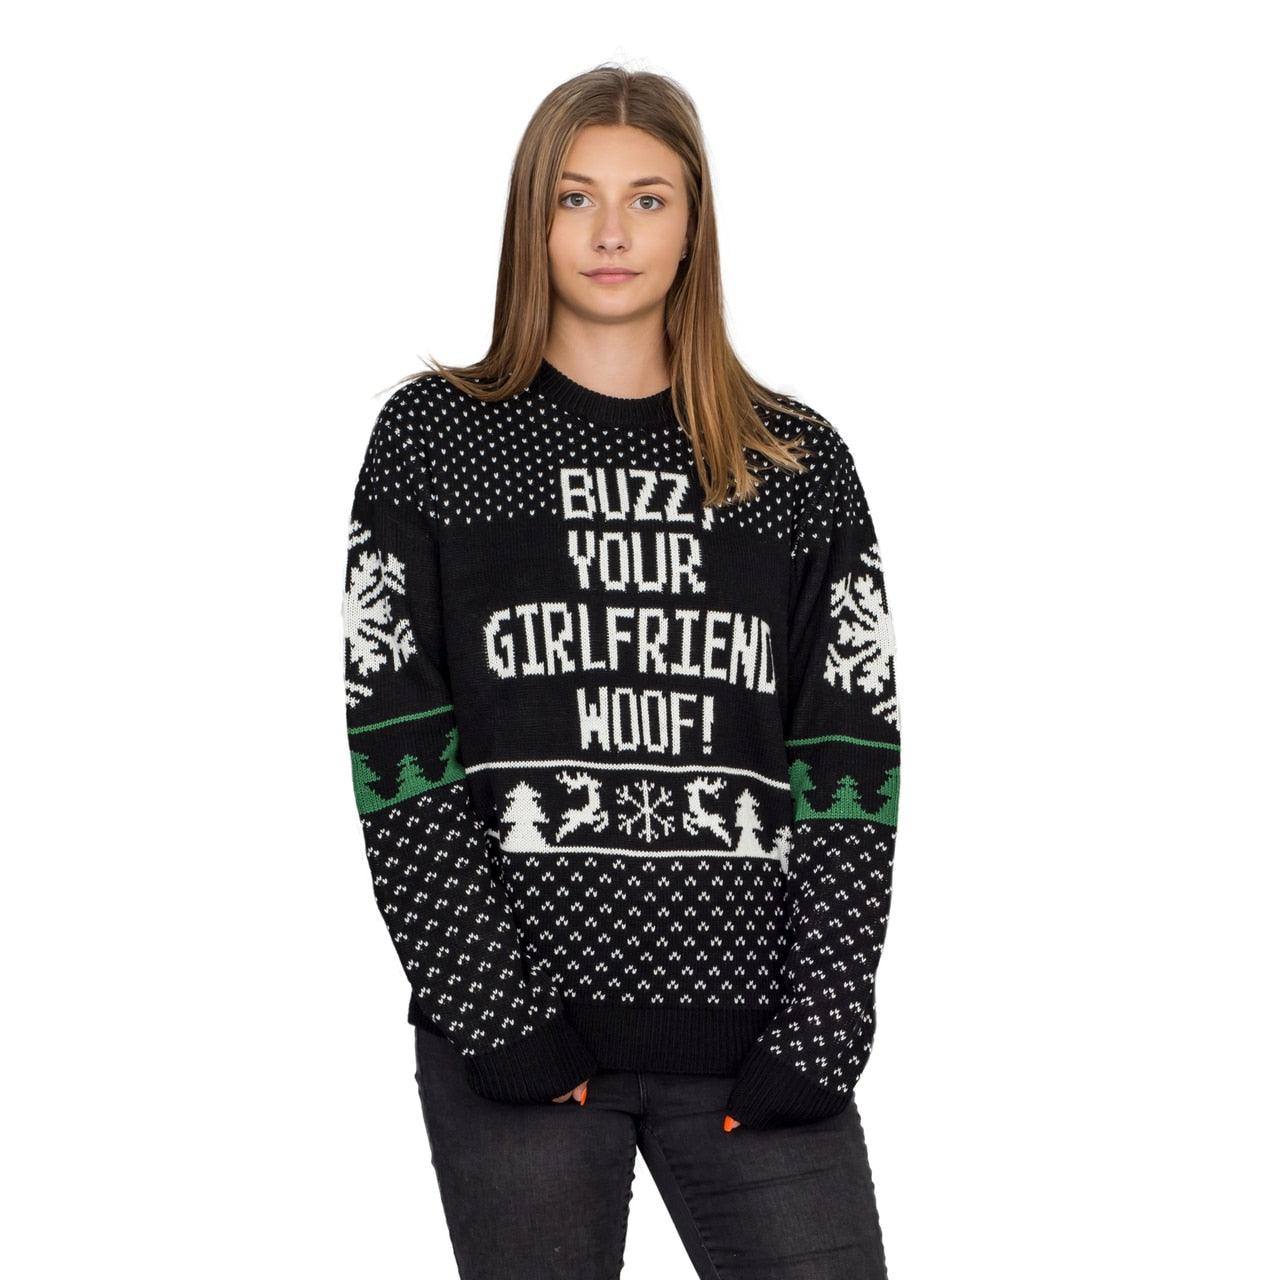 Home Alone Movie Christmas Sweater Apparel | Shop Online